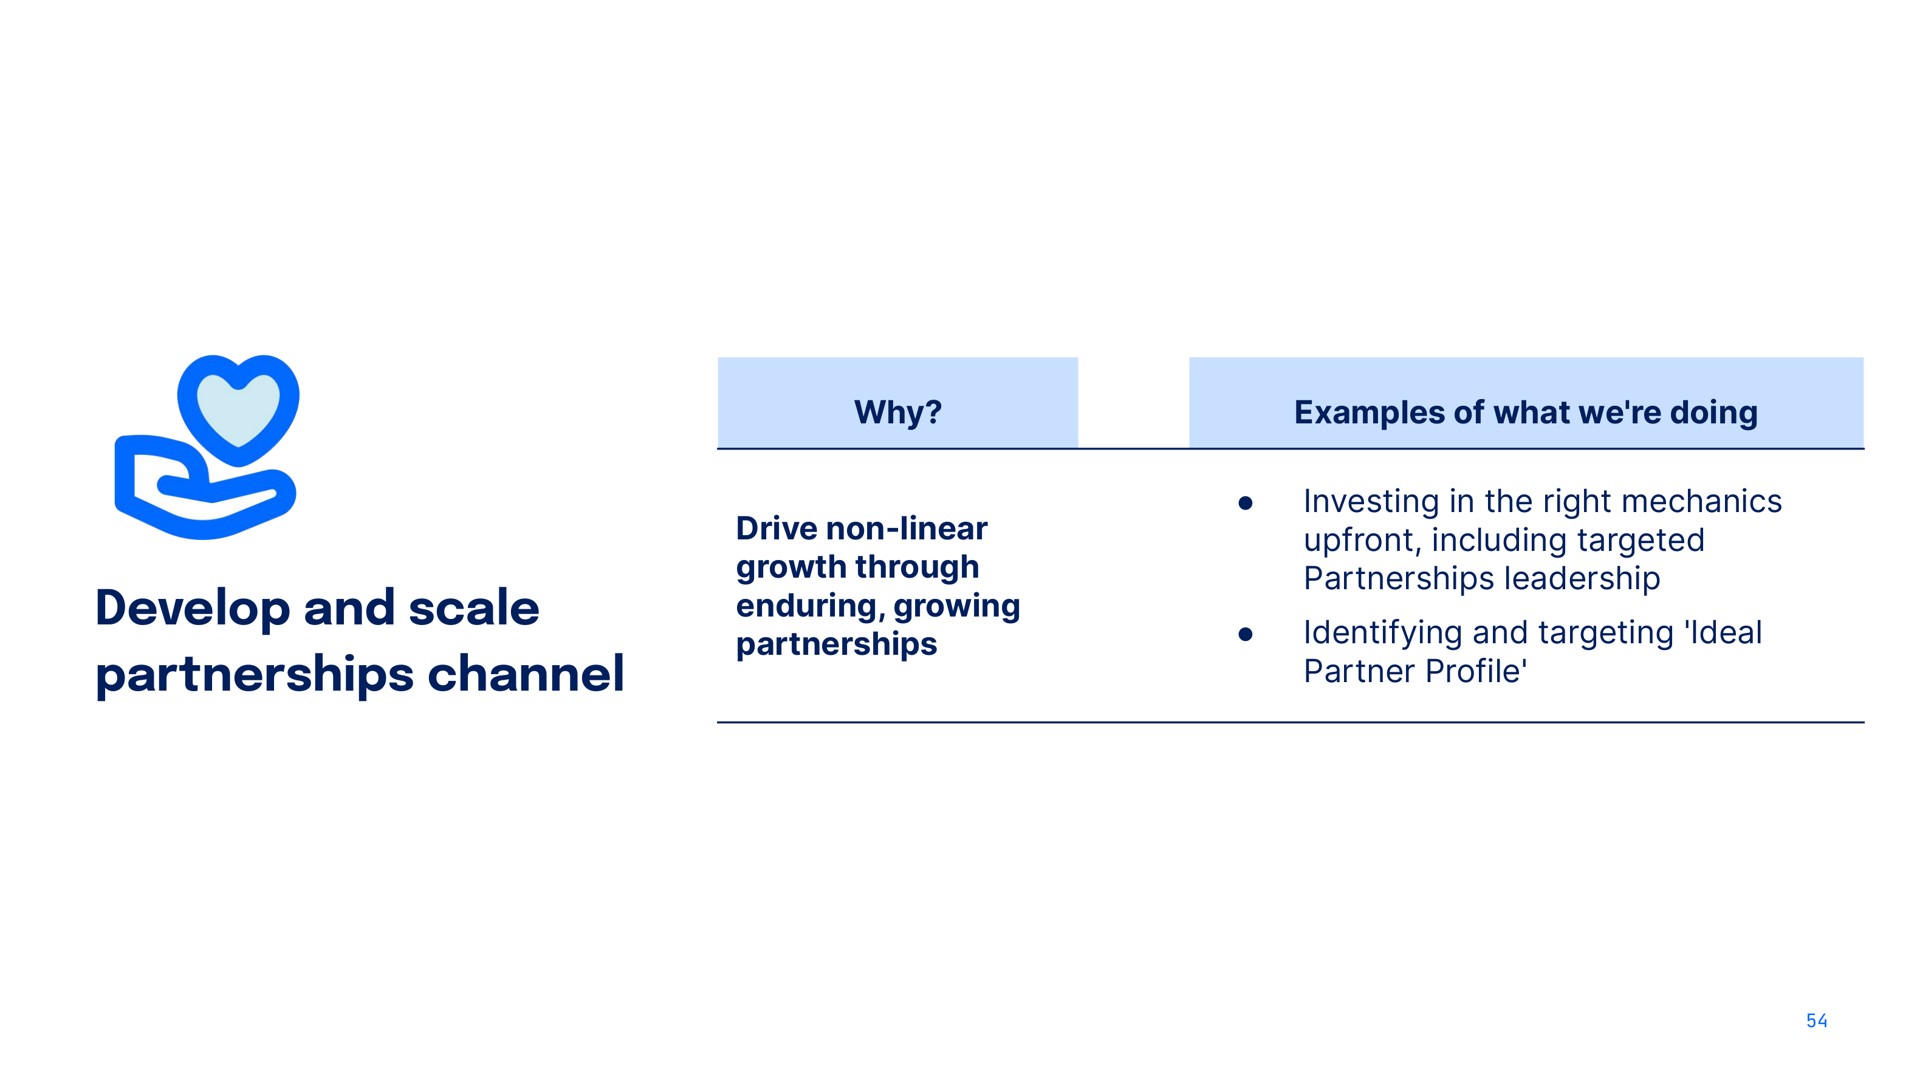 why examples of what we doing develop and scale partnerships channel drive non linear growth through enduring growing partnerships investing in the right mechanics including targeted partnerships leadership identifying and targeting ideal partner profile | DigitalOcean